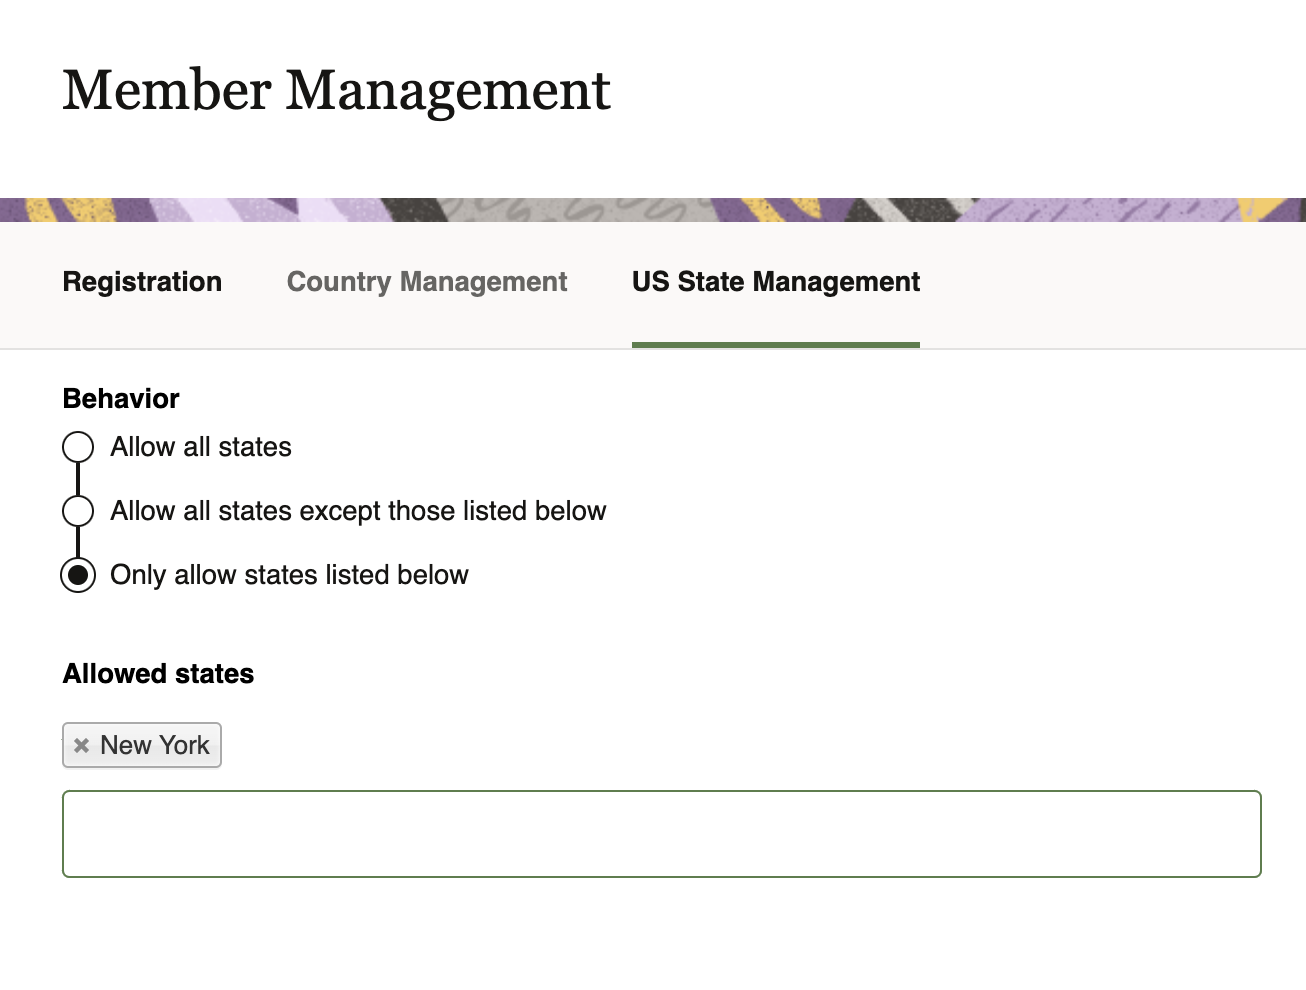 This image displays the US State Management area of Member Management, with the option “Only allow states listed below” selected.